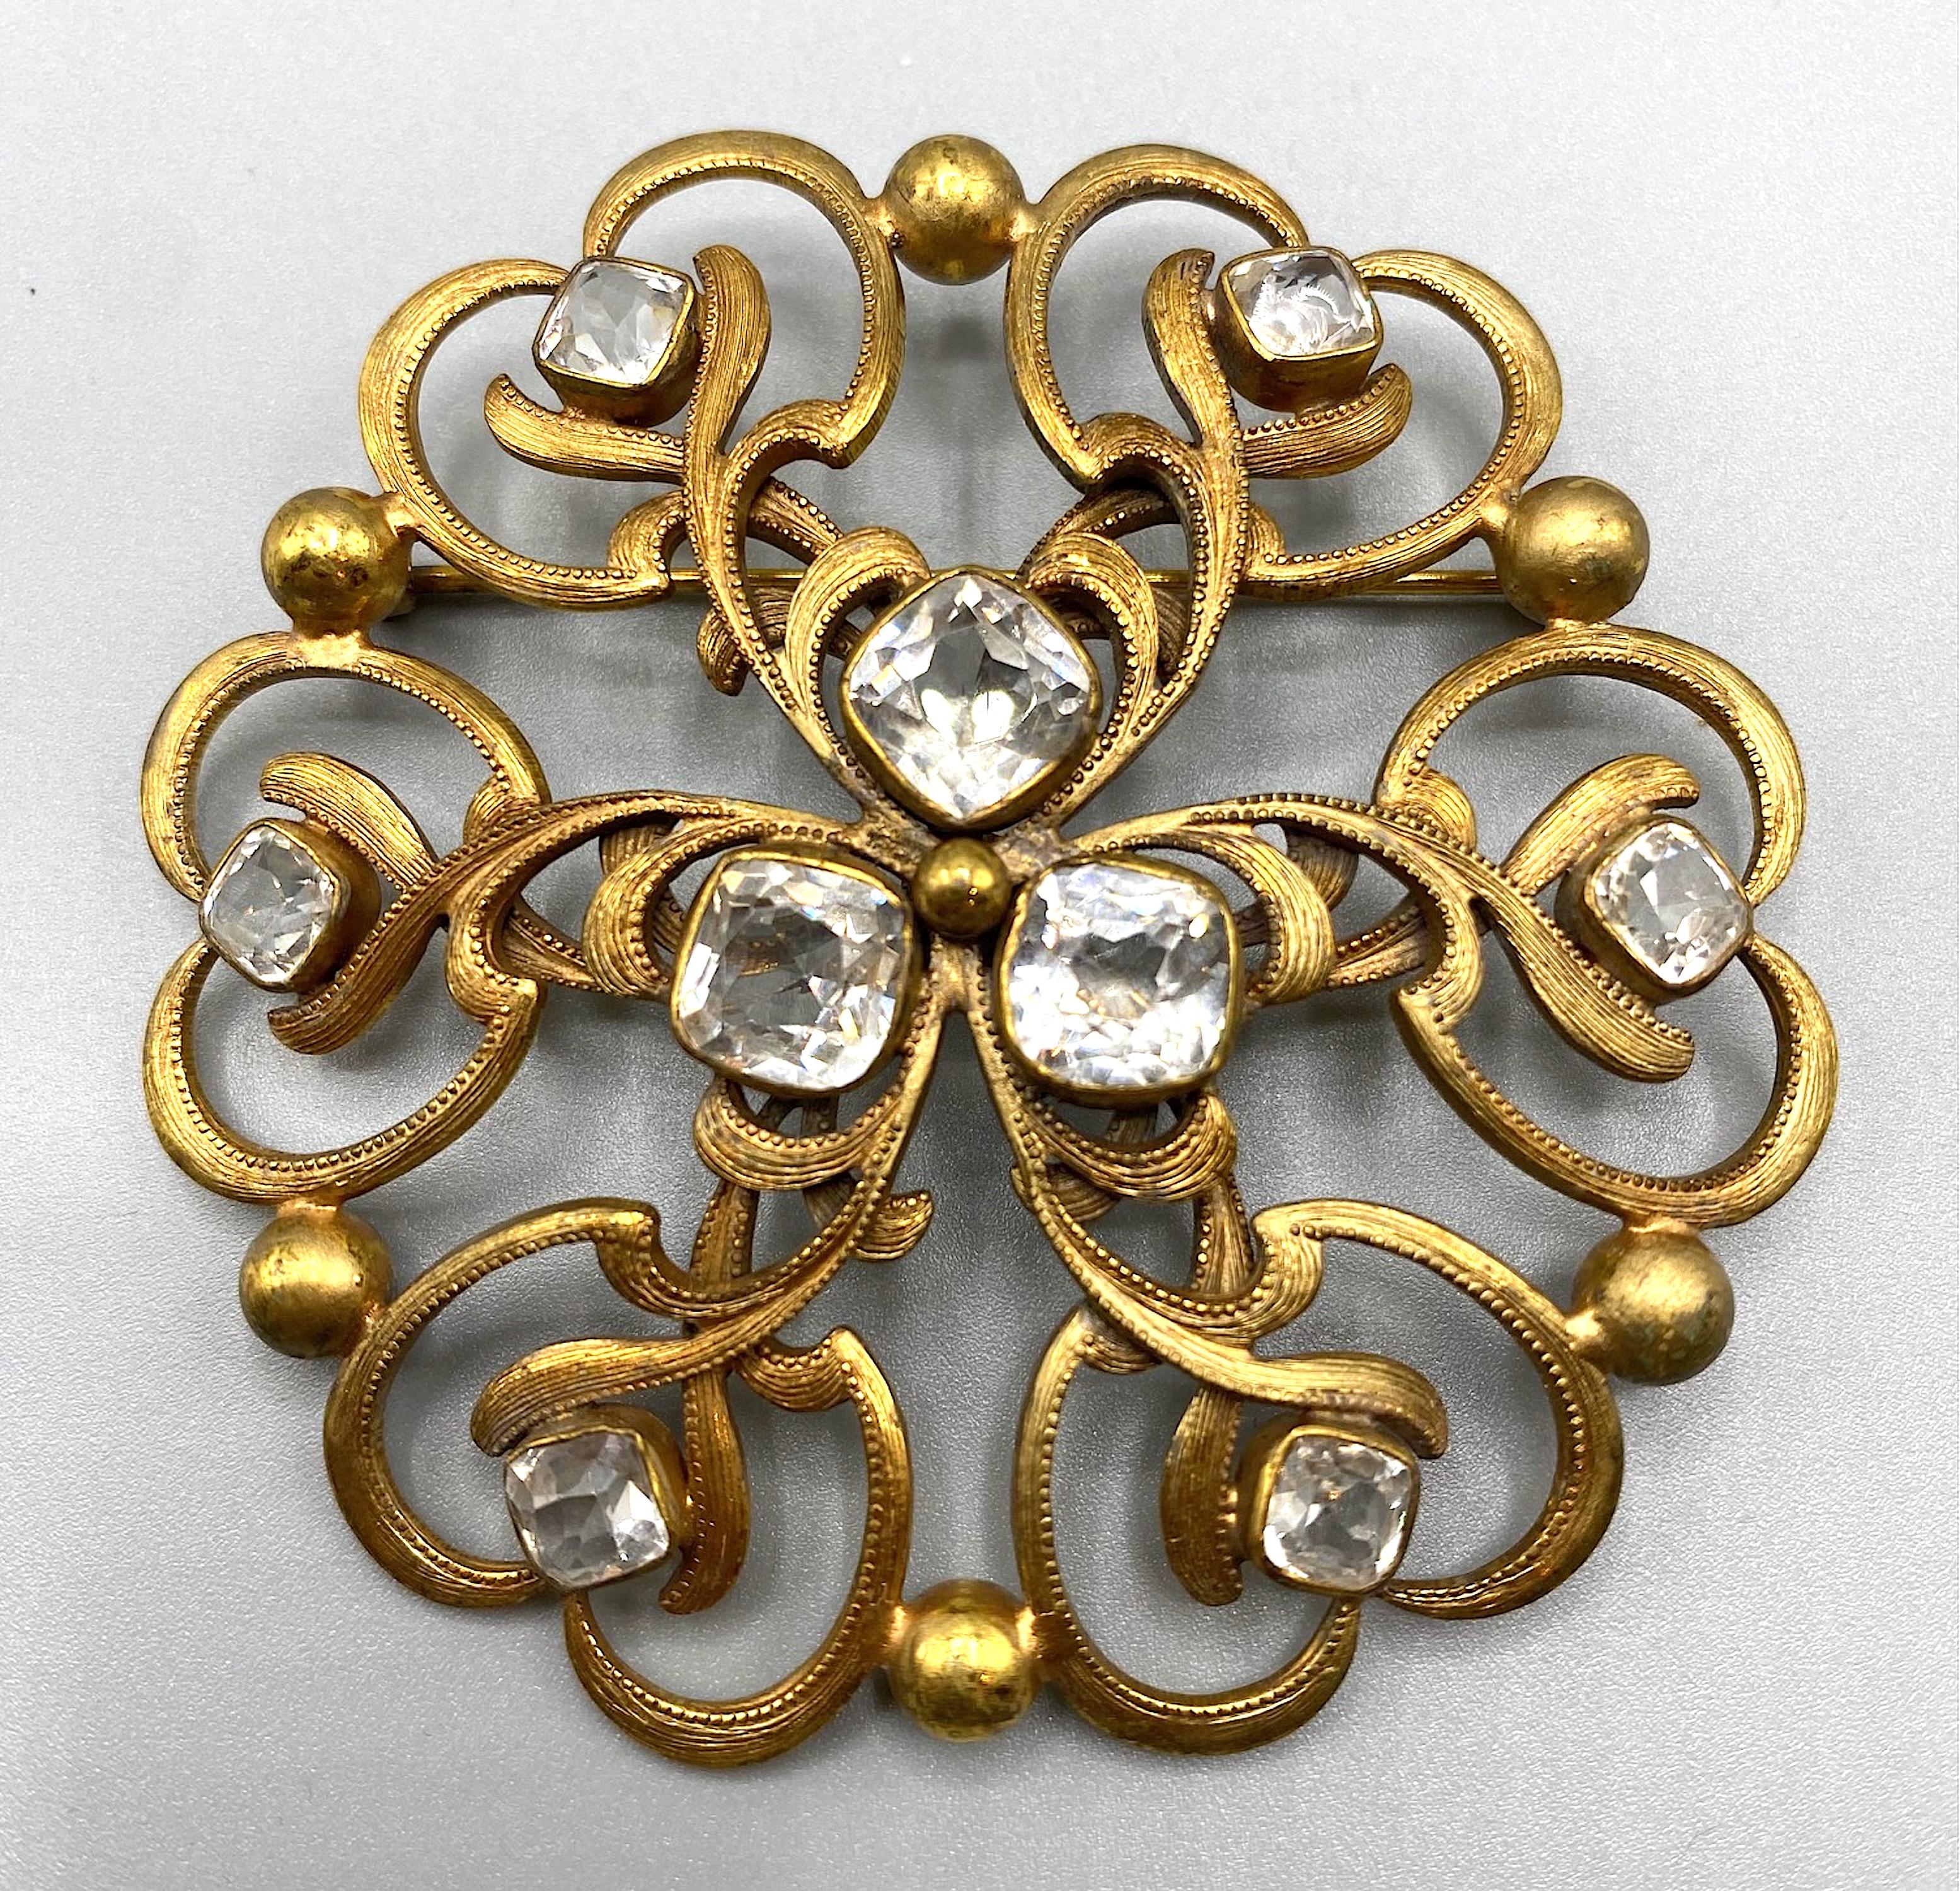 A very nice Joseff of Hollywood  signature round  open work Russian gold and cushion cut crystal brooch circa 1940's.
Joseff of Hollywood was a jewelry firm founded by Eugene Joseff. The firm was particularly noted for creating costume jewelry for